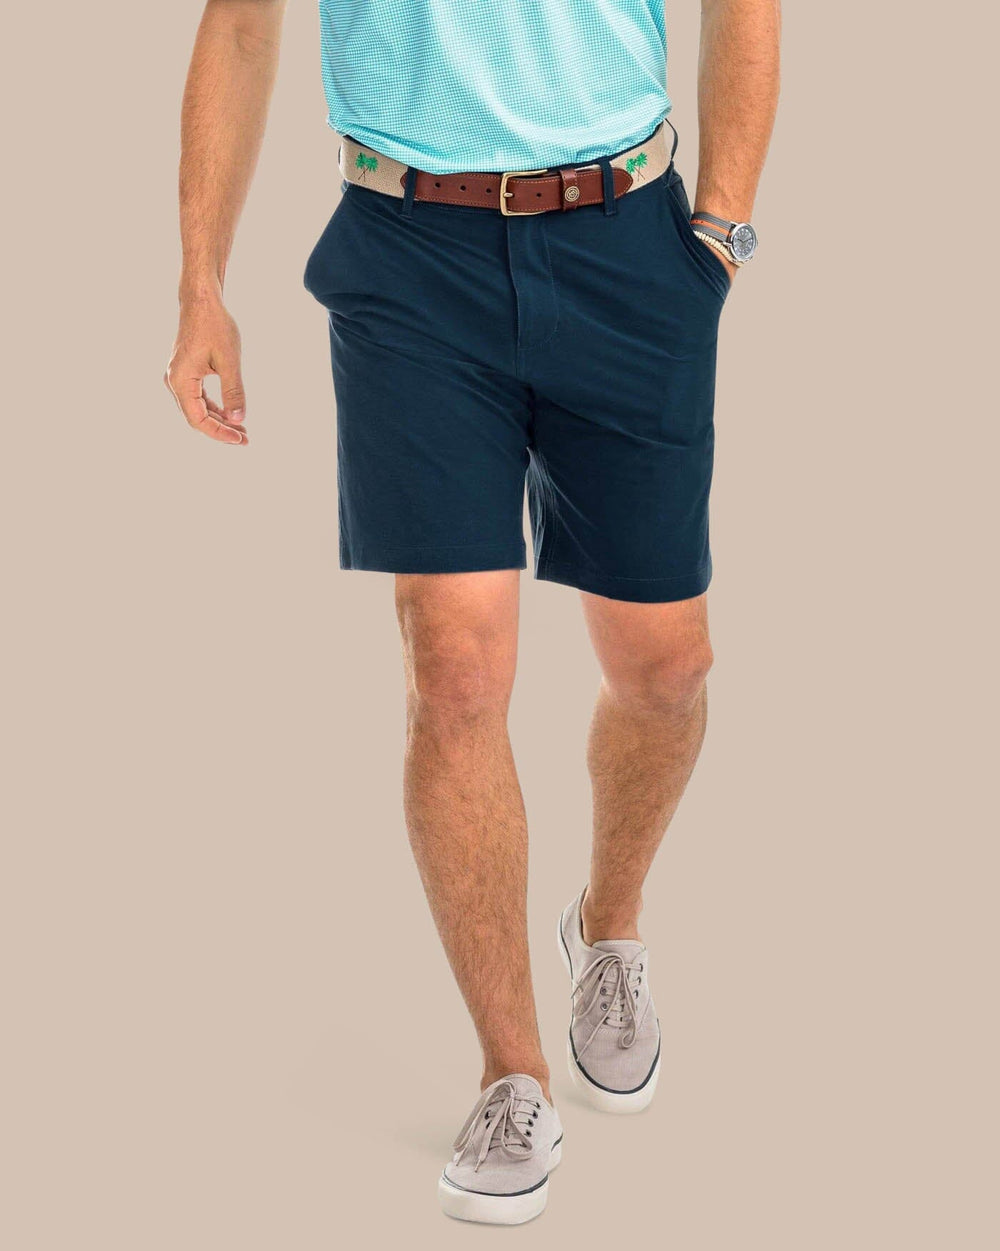 The front of the Men's T3 Gulf 9 Inch Performance Short by Southern Tide - True Navy